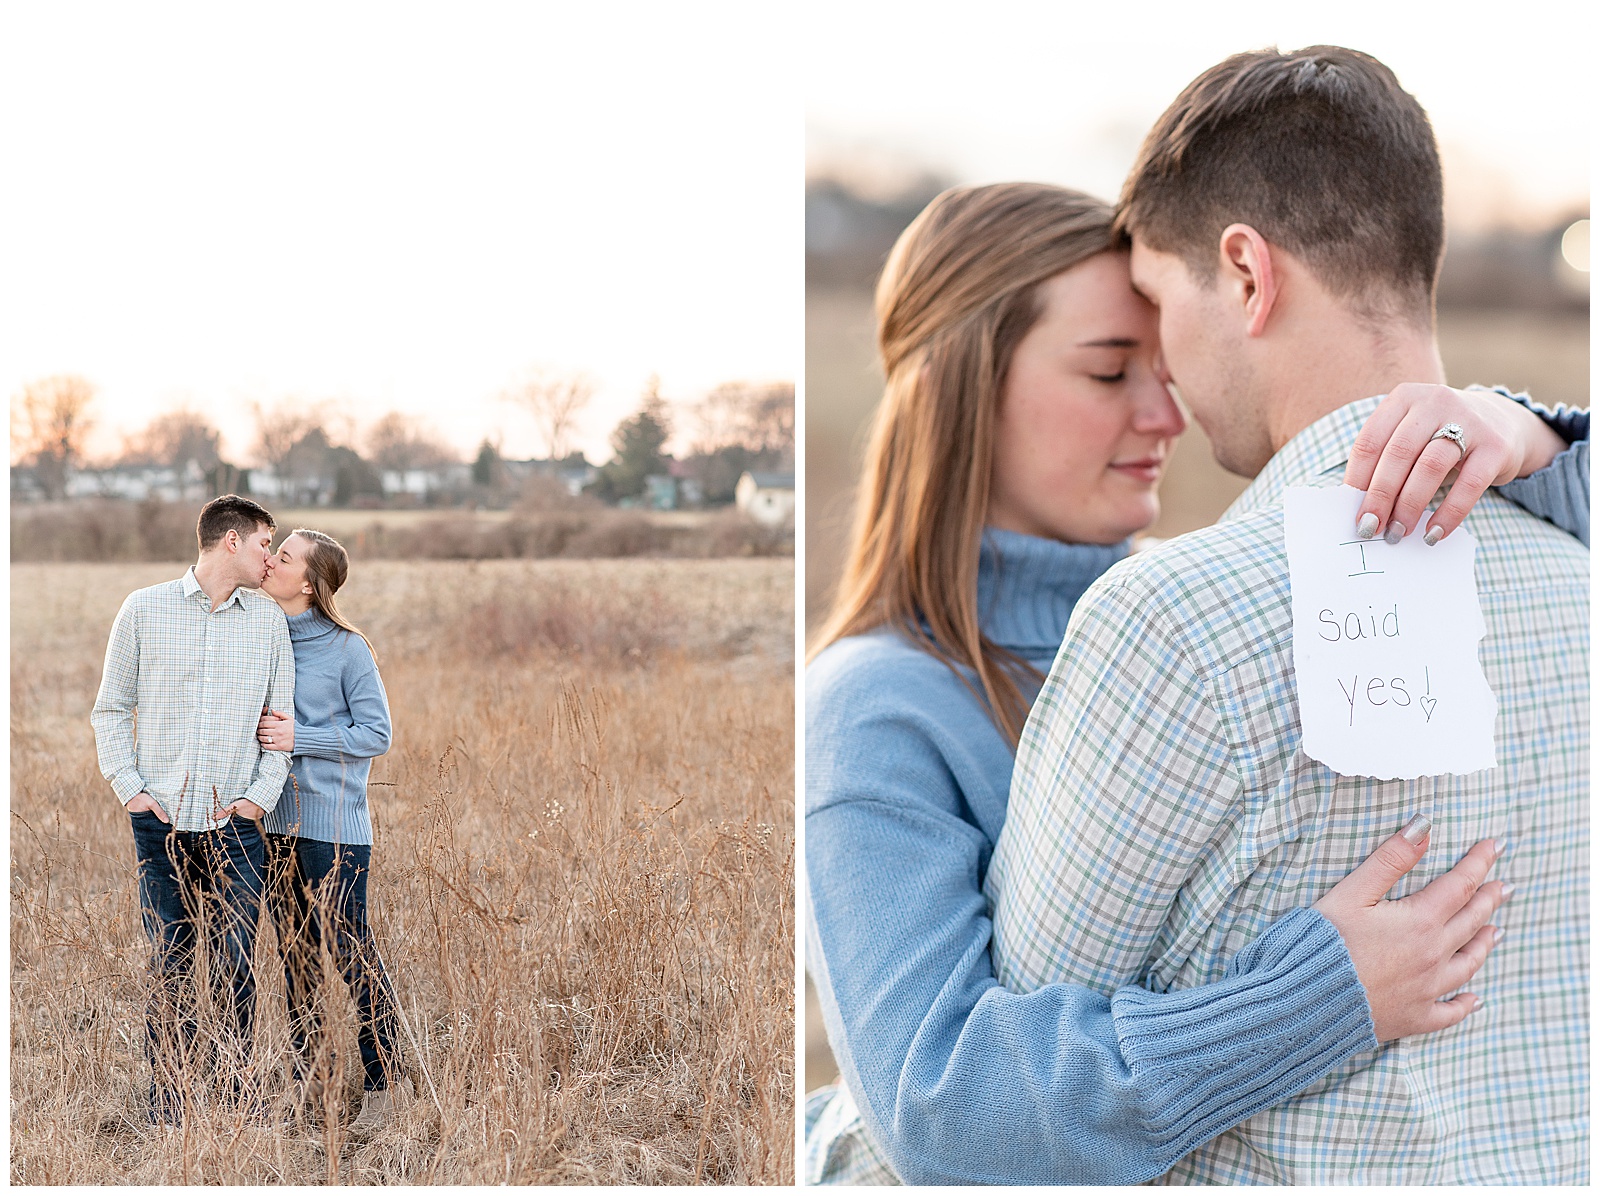 couple wrapped in each others arms as girl holds a note that says "I said Yes"